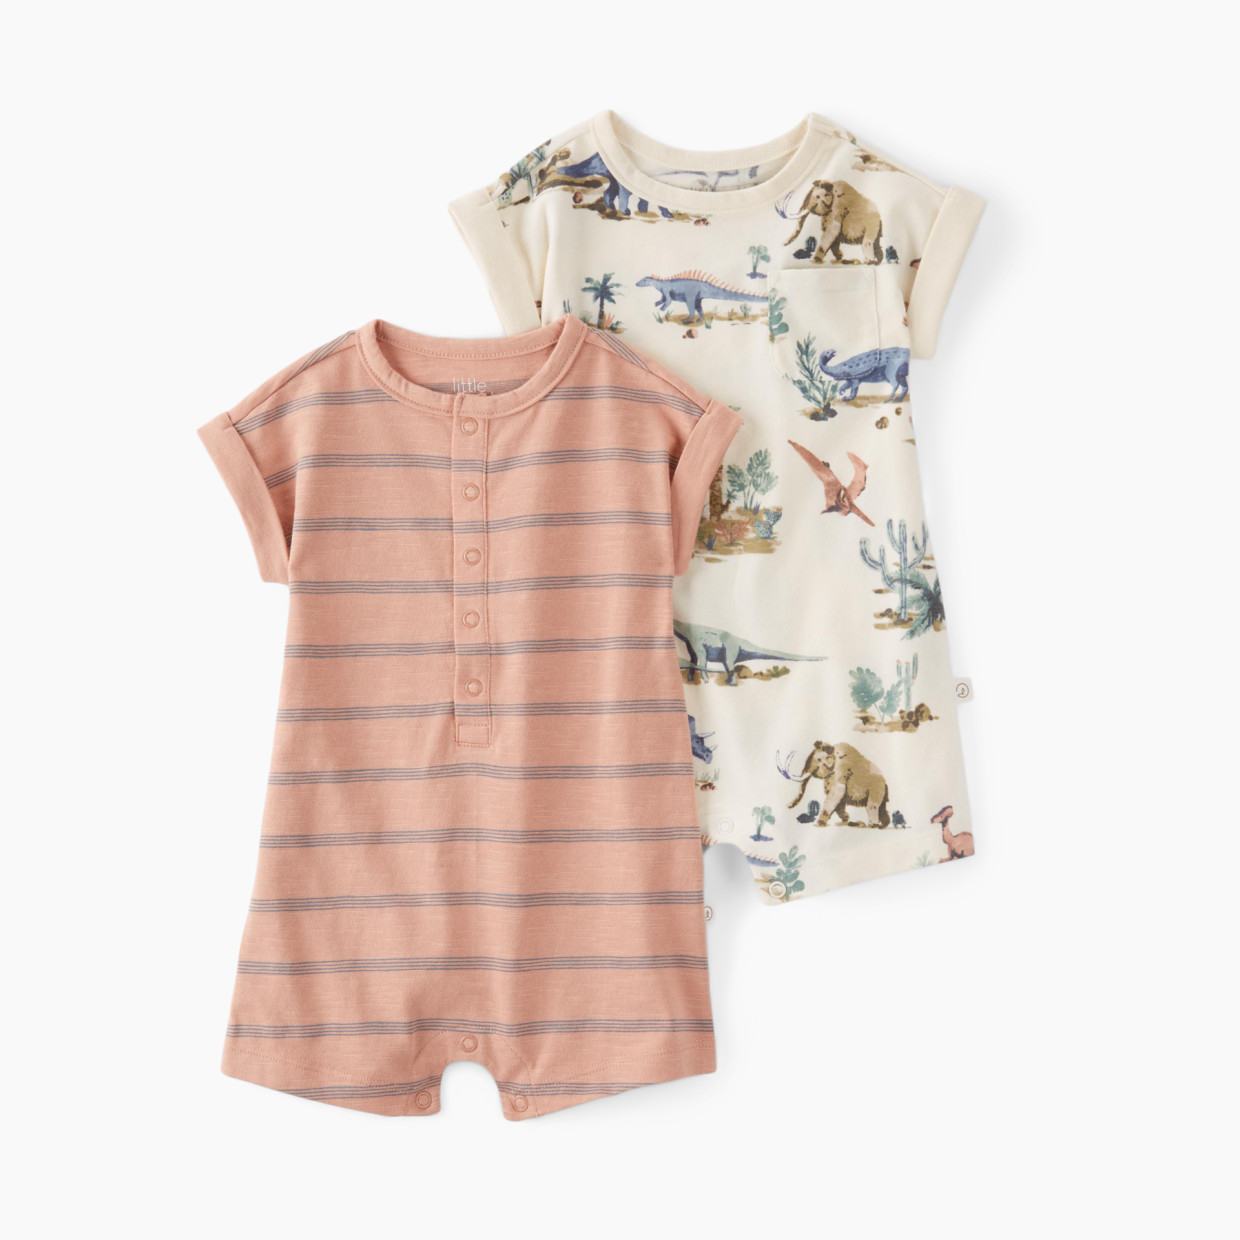 Carter's Little Planet 2-Pack Organic Cotton Rompers - Multi-Color, Nb.